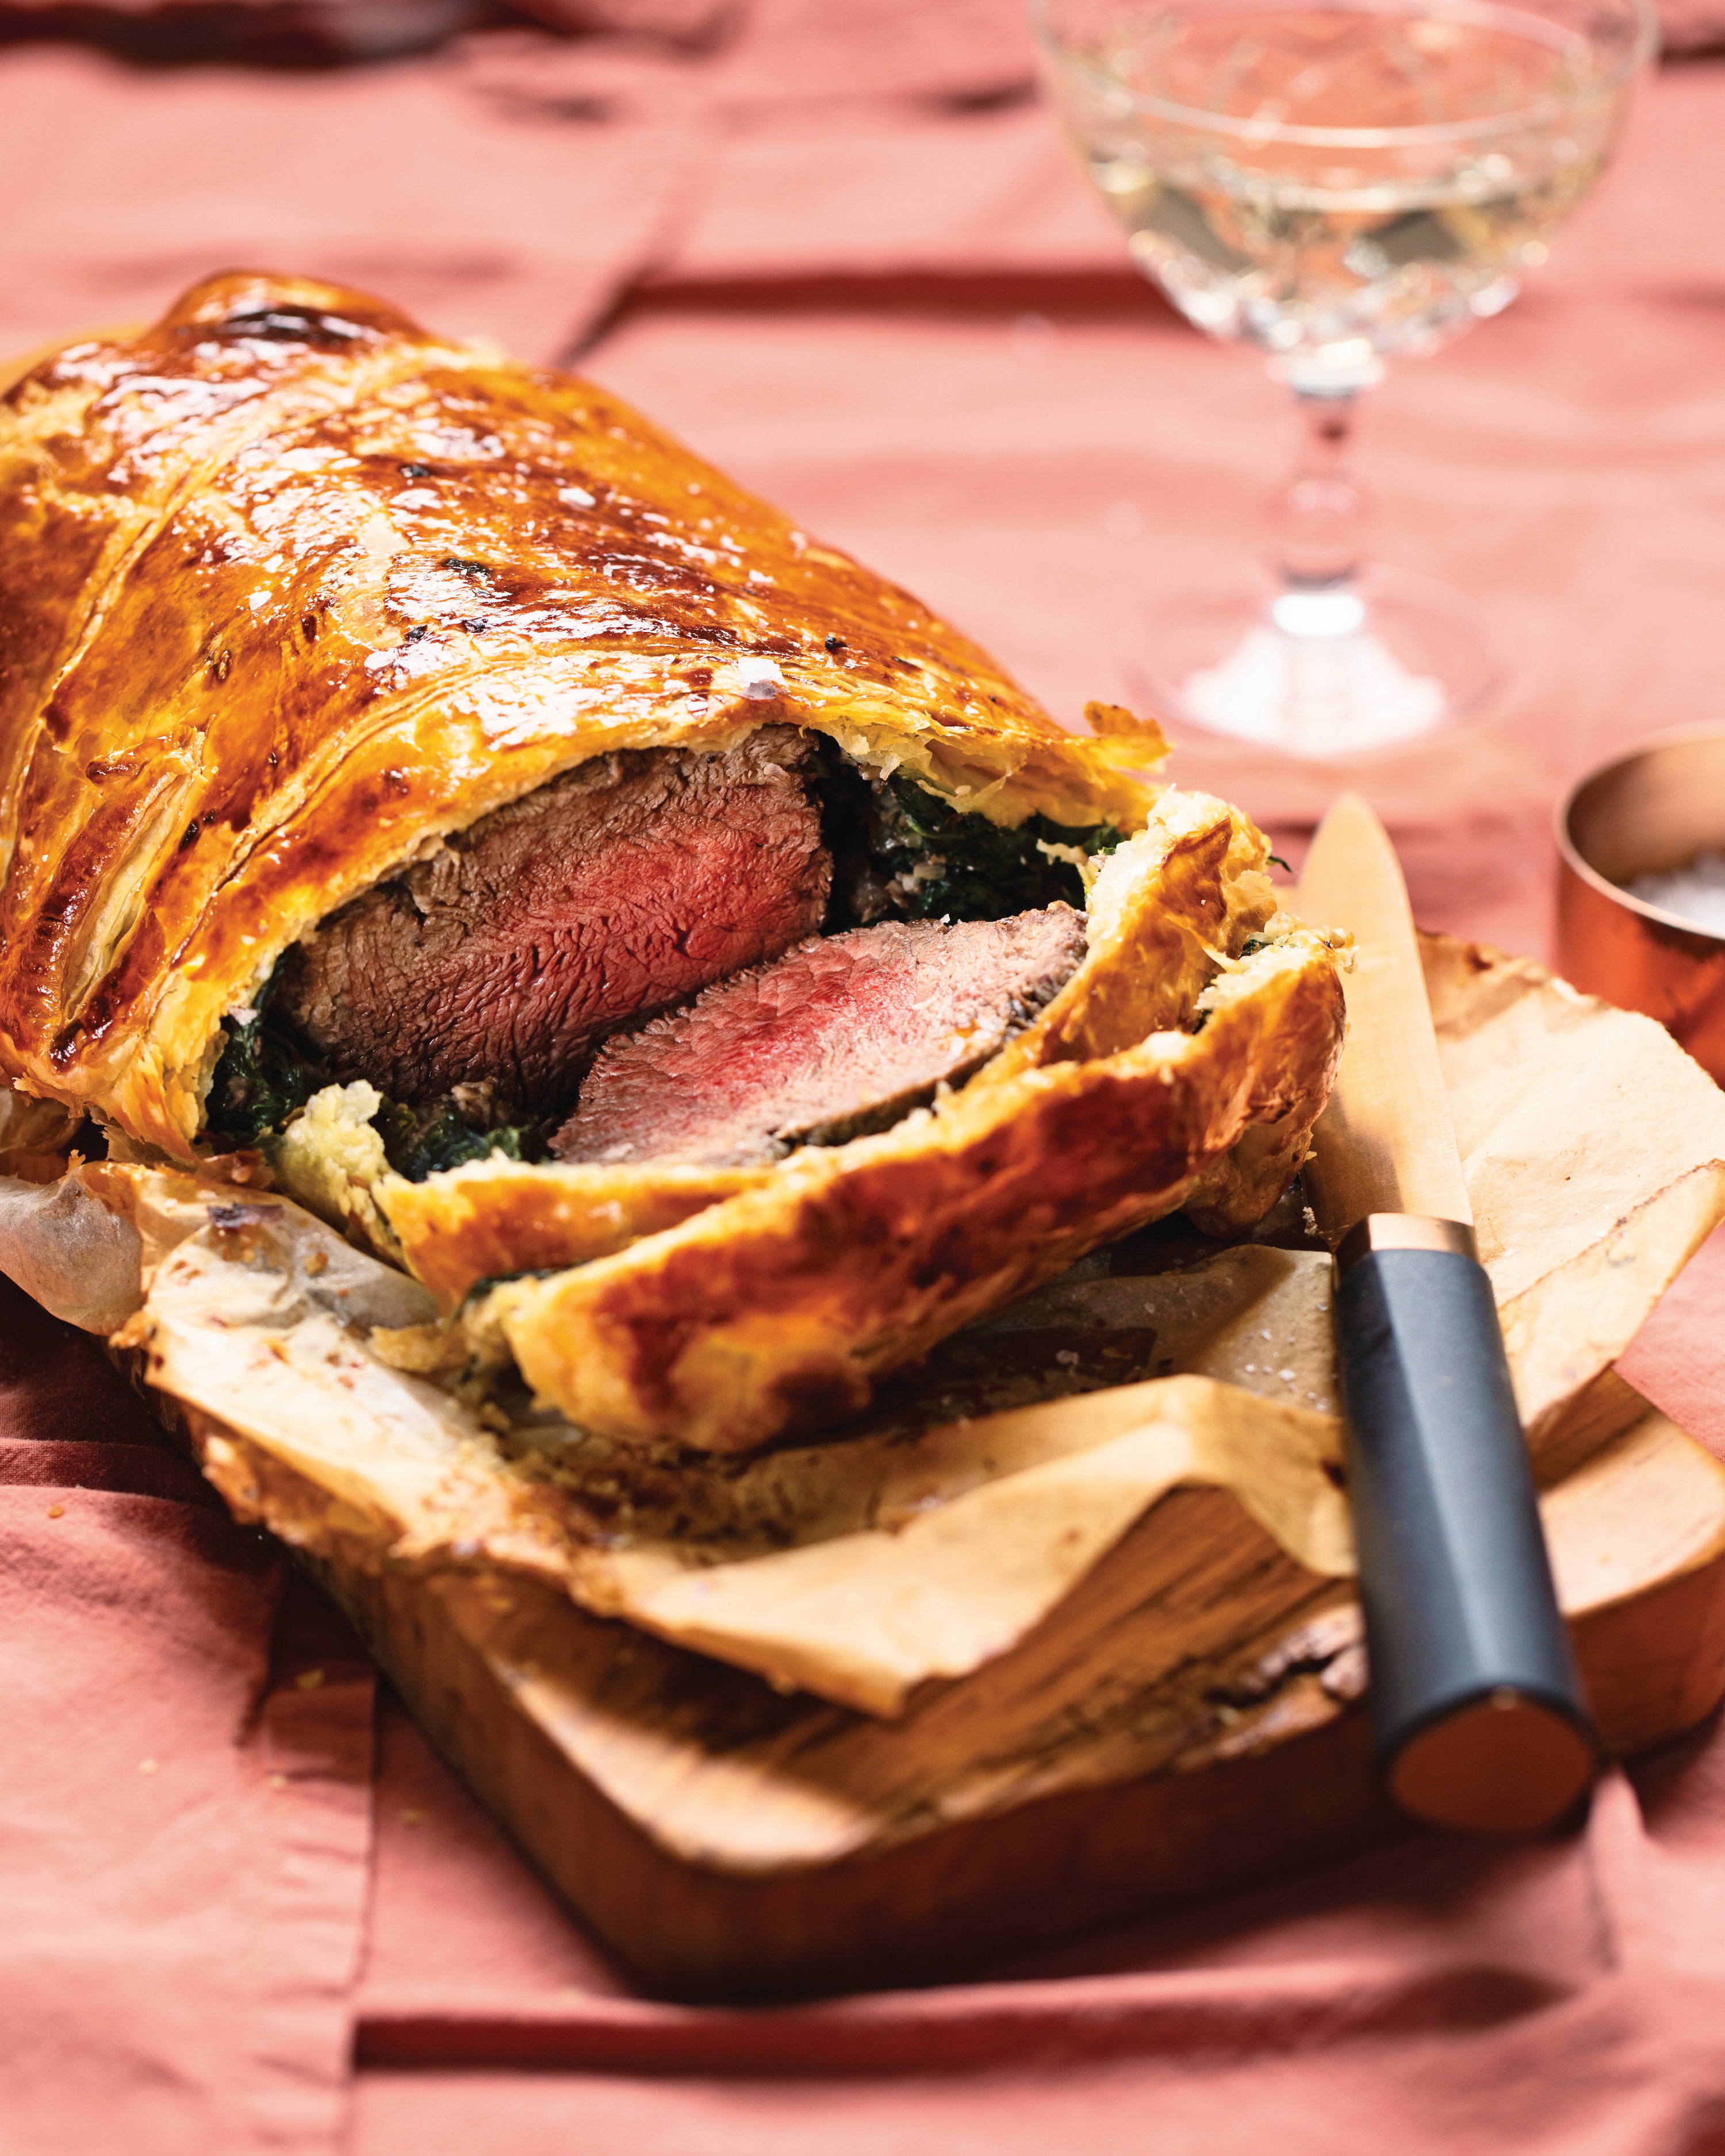 You are currently viewing Traditional English beef Wellington with mushroom-Port stuffing